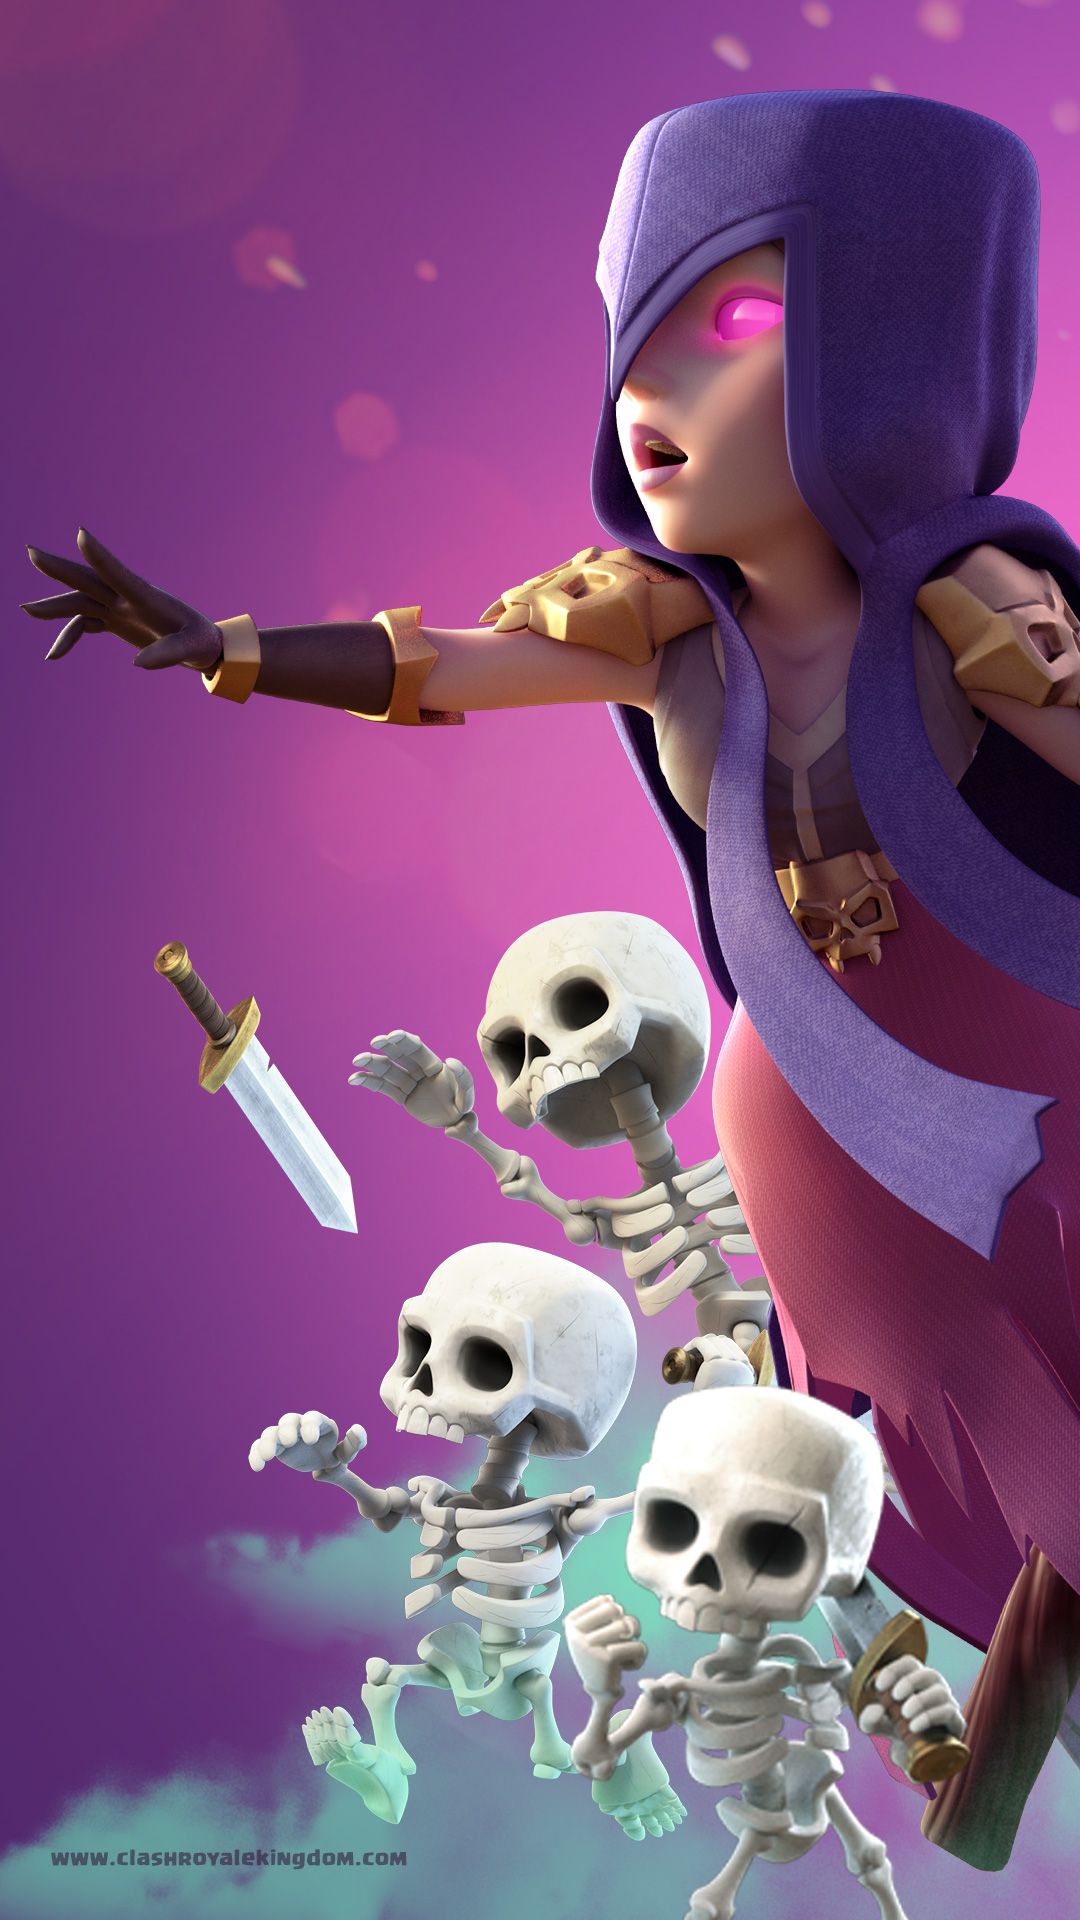 The skeletons were born inside her. Her pink eyes keep her beauty still. Download high quality Cla. Clash royale wallpaper, Clash royale drawings, Witch wallpaper